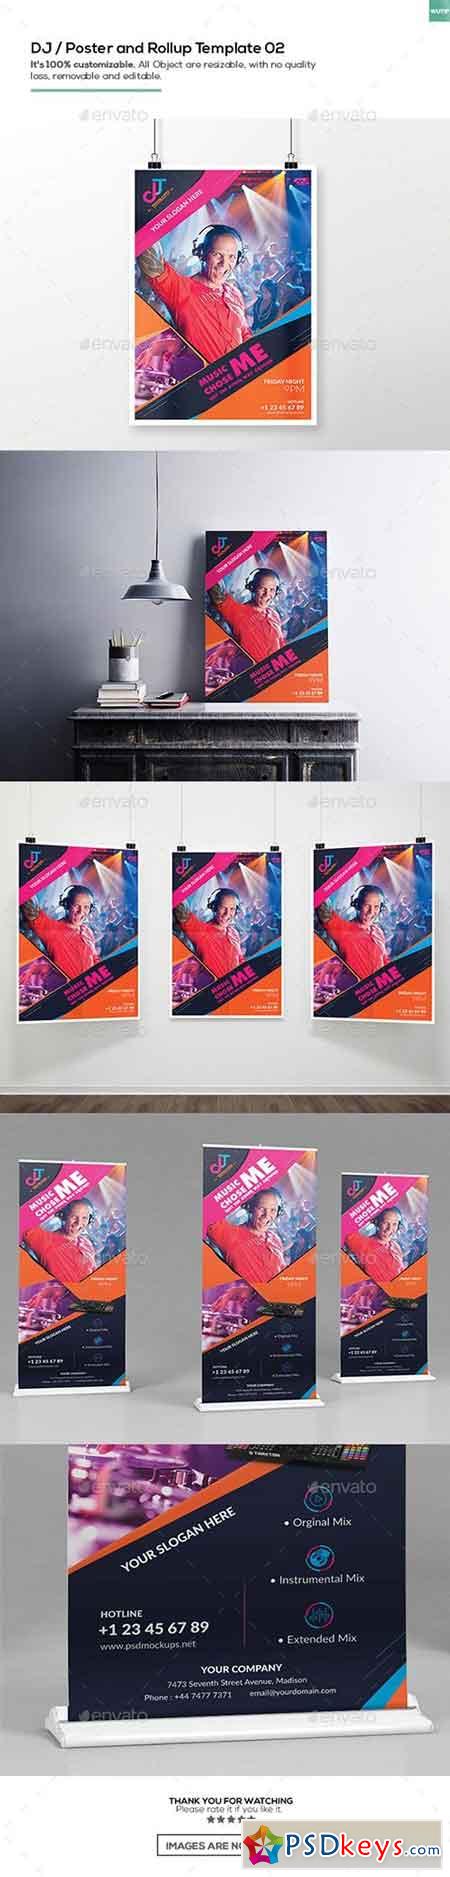 DJ A3 Poster and Rollup Template 02 16207453